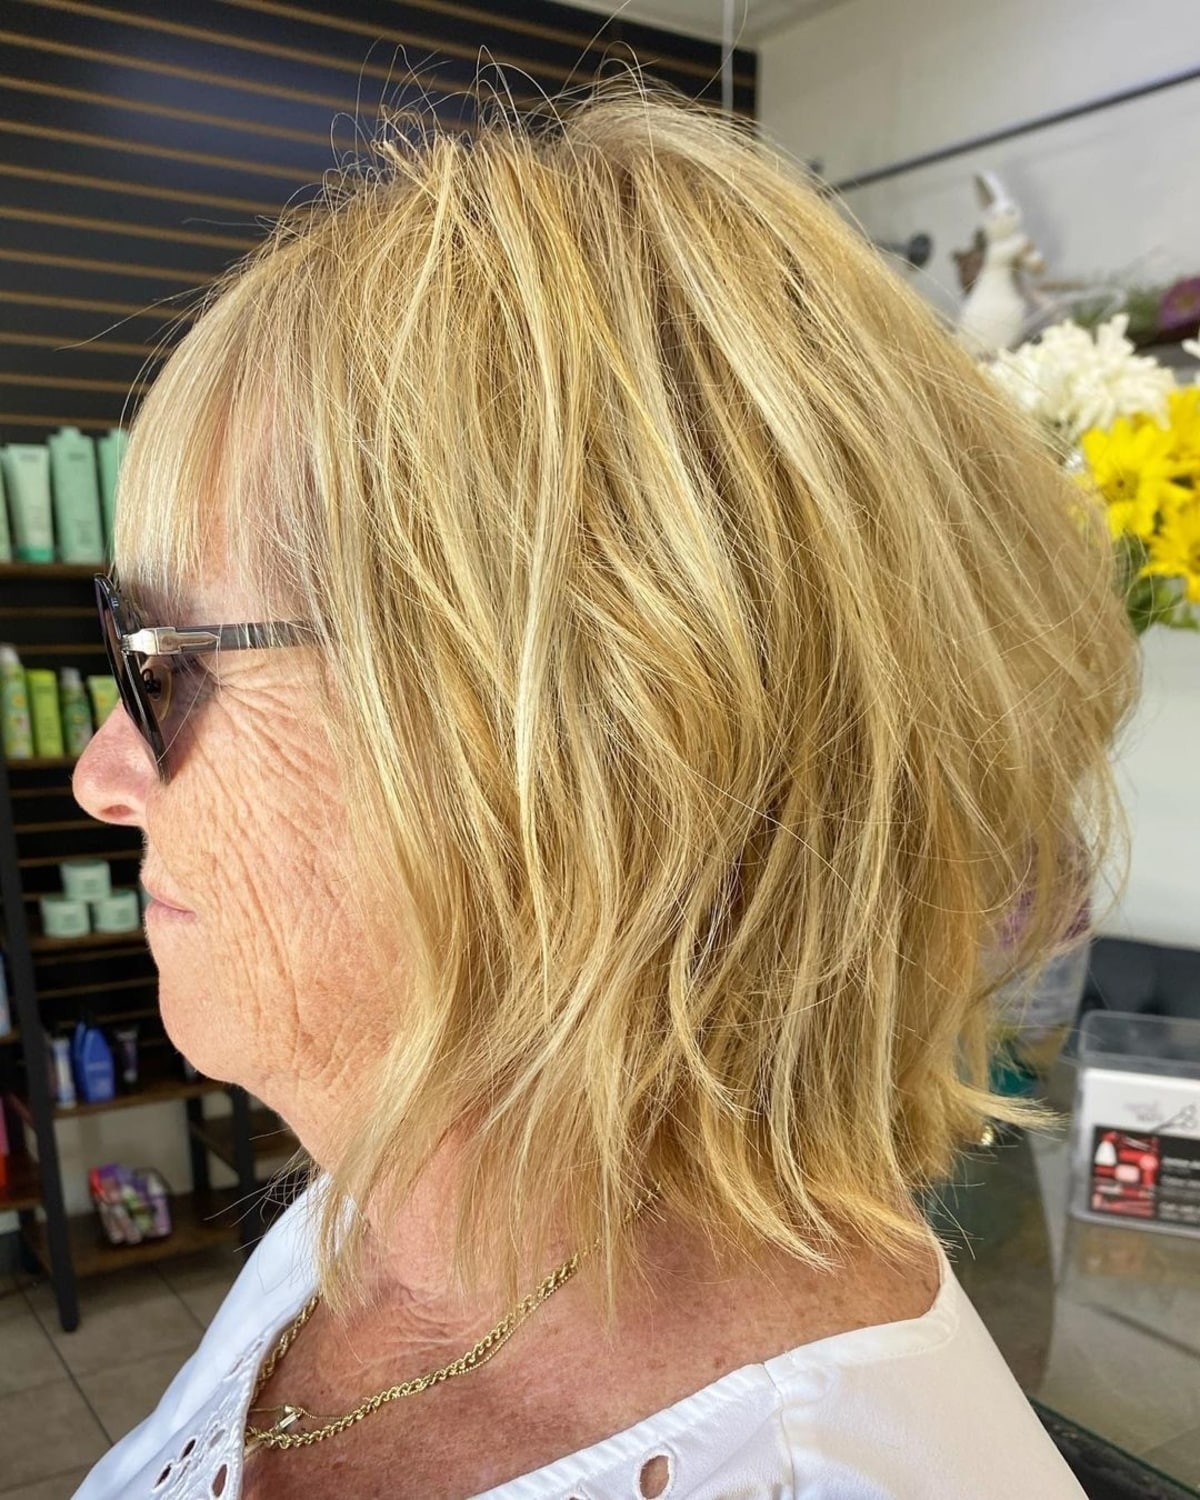 Mid-length bob with layers hairstyle for older women